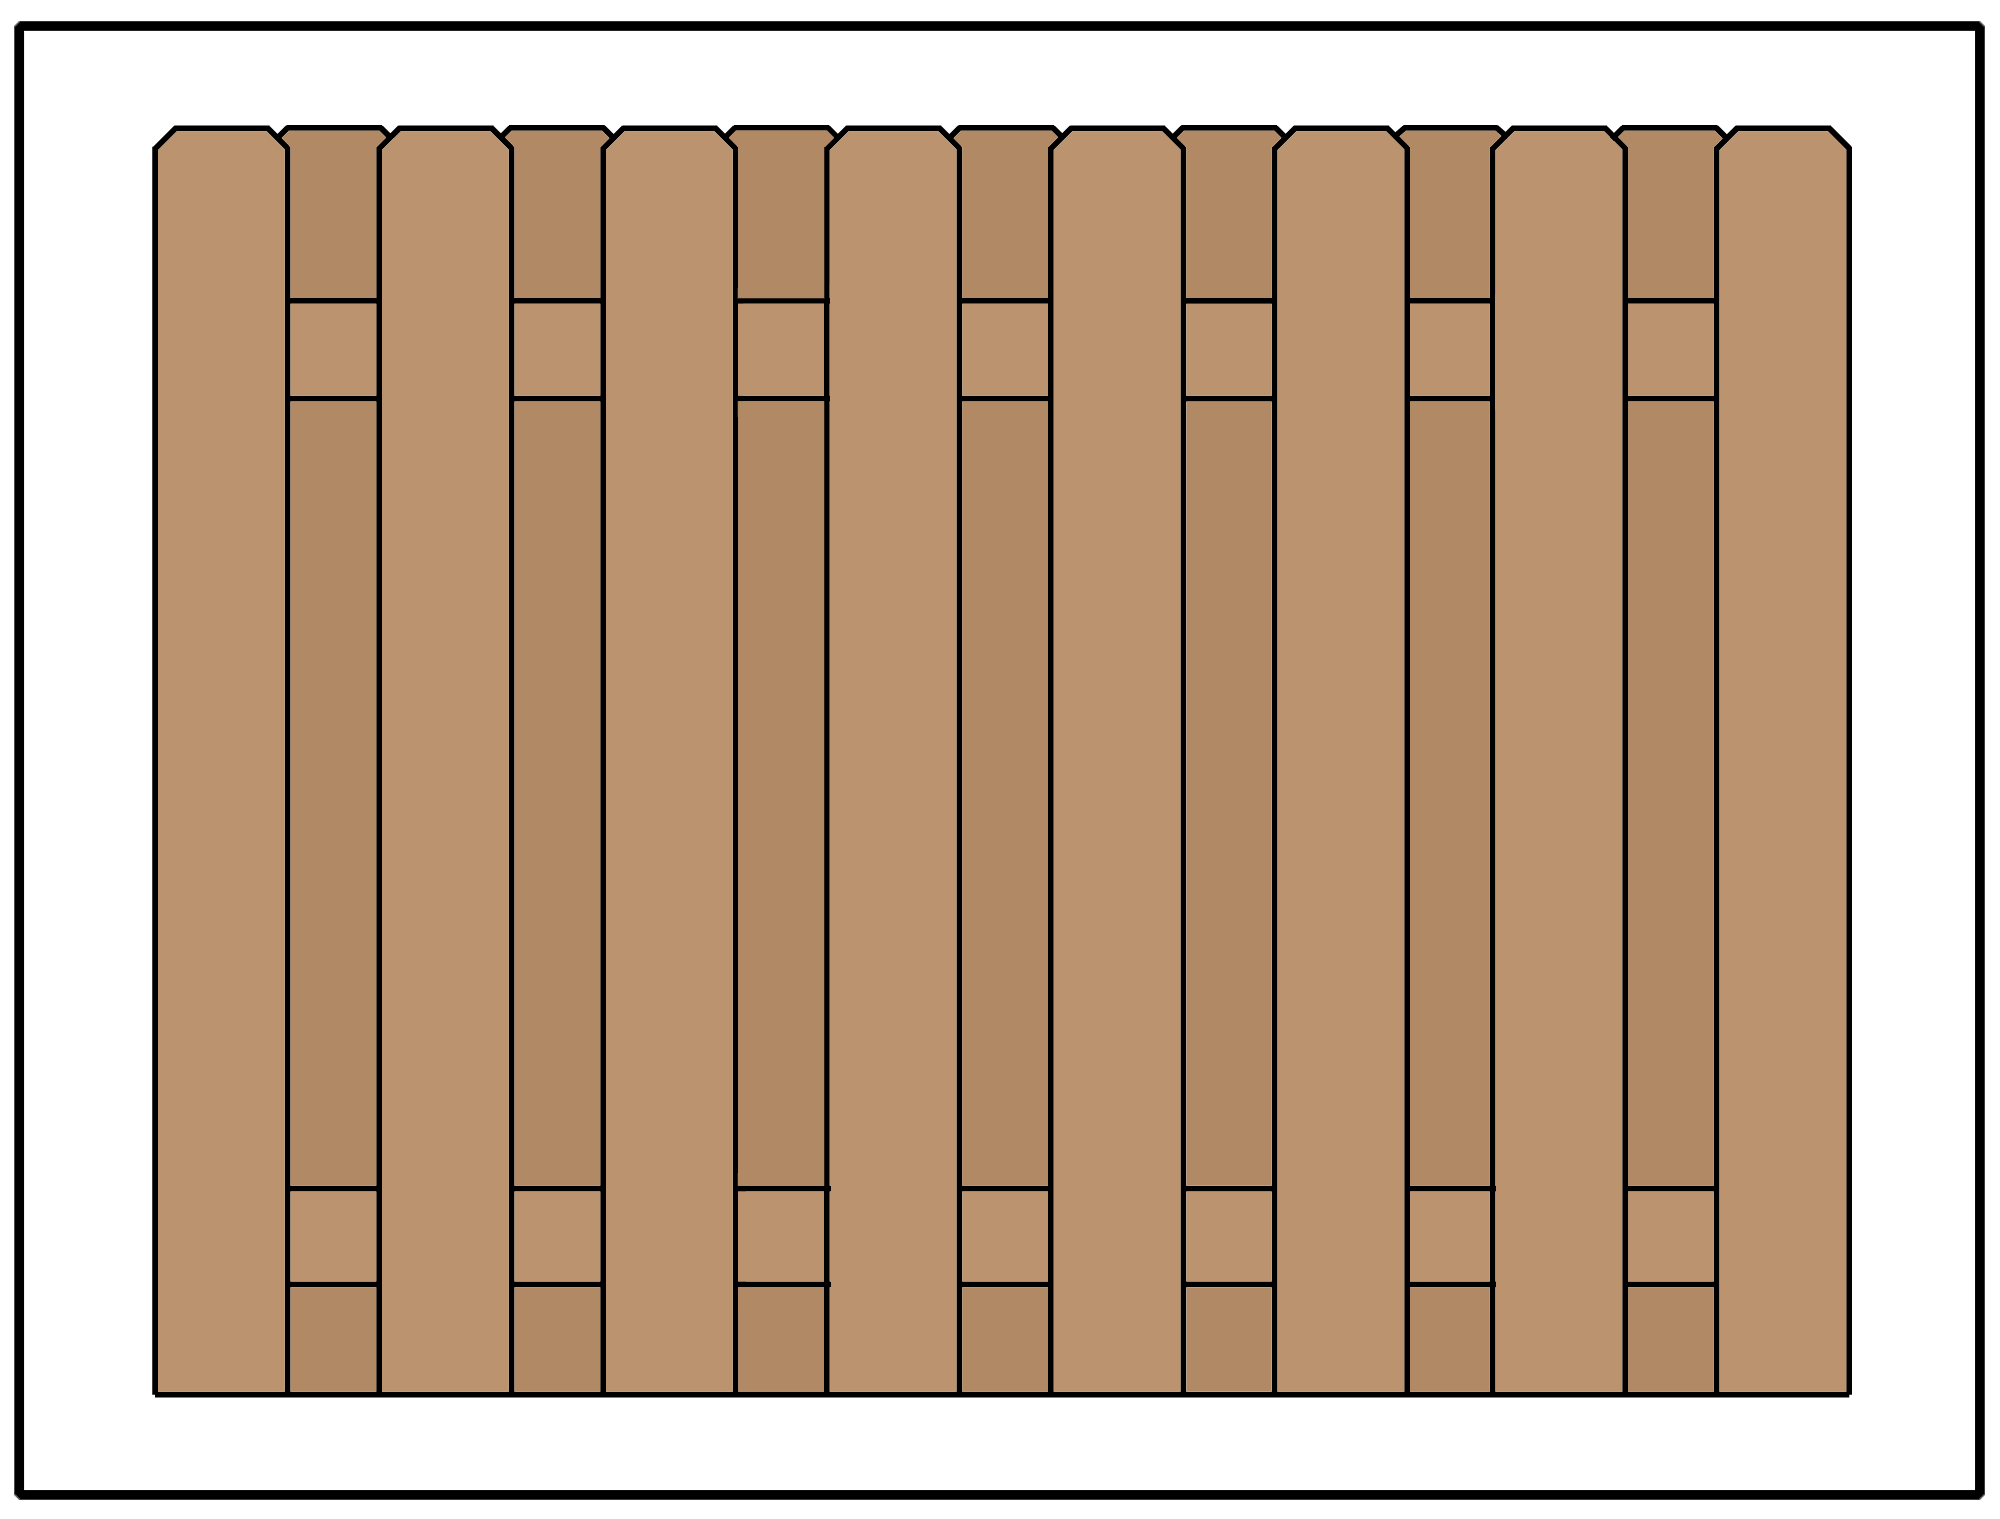 Illustration of a shadowbox style privacy fence